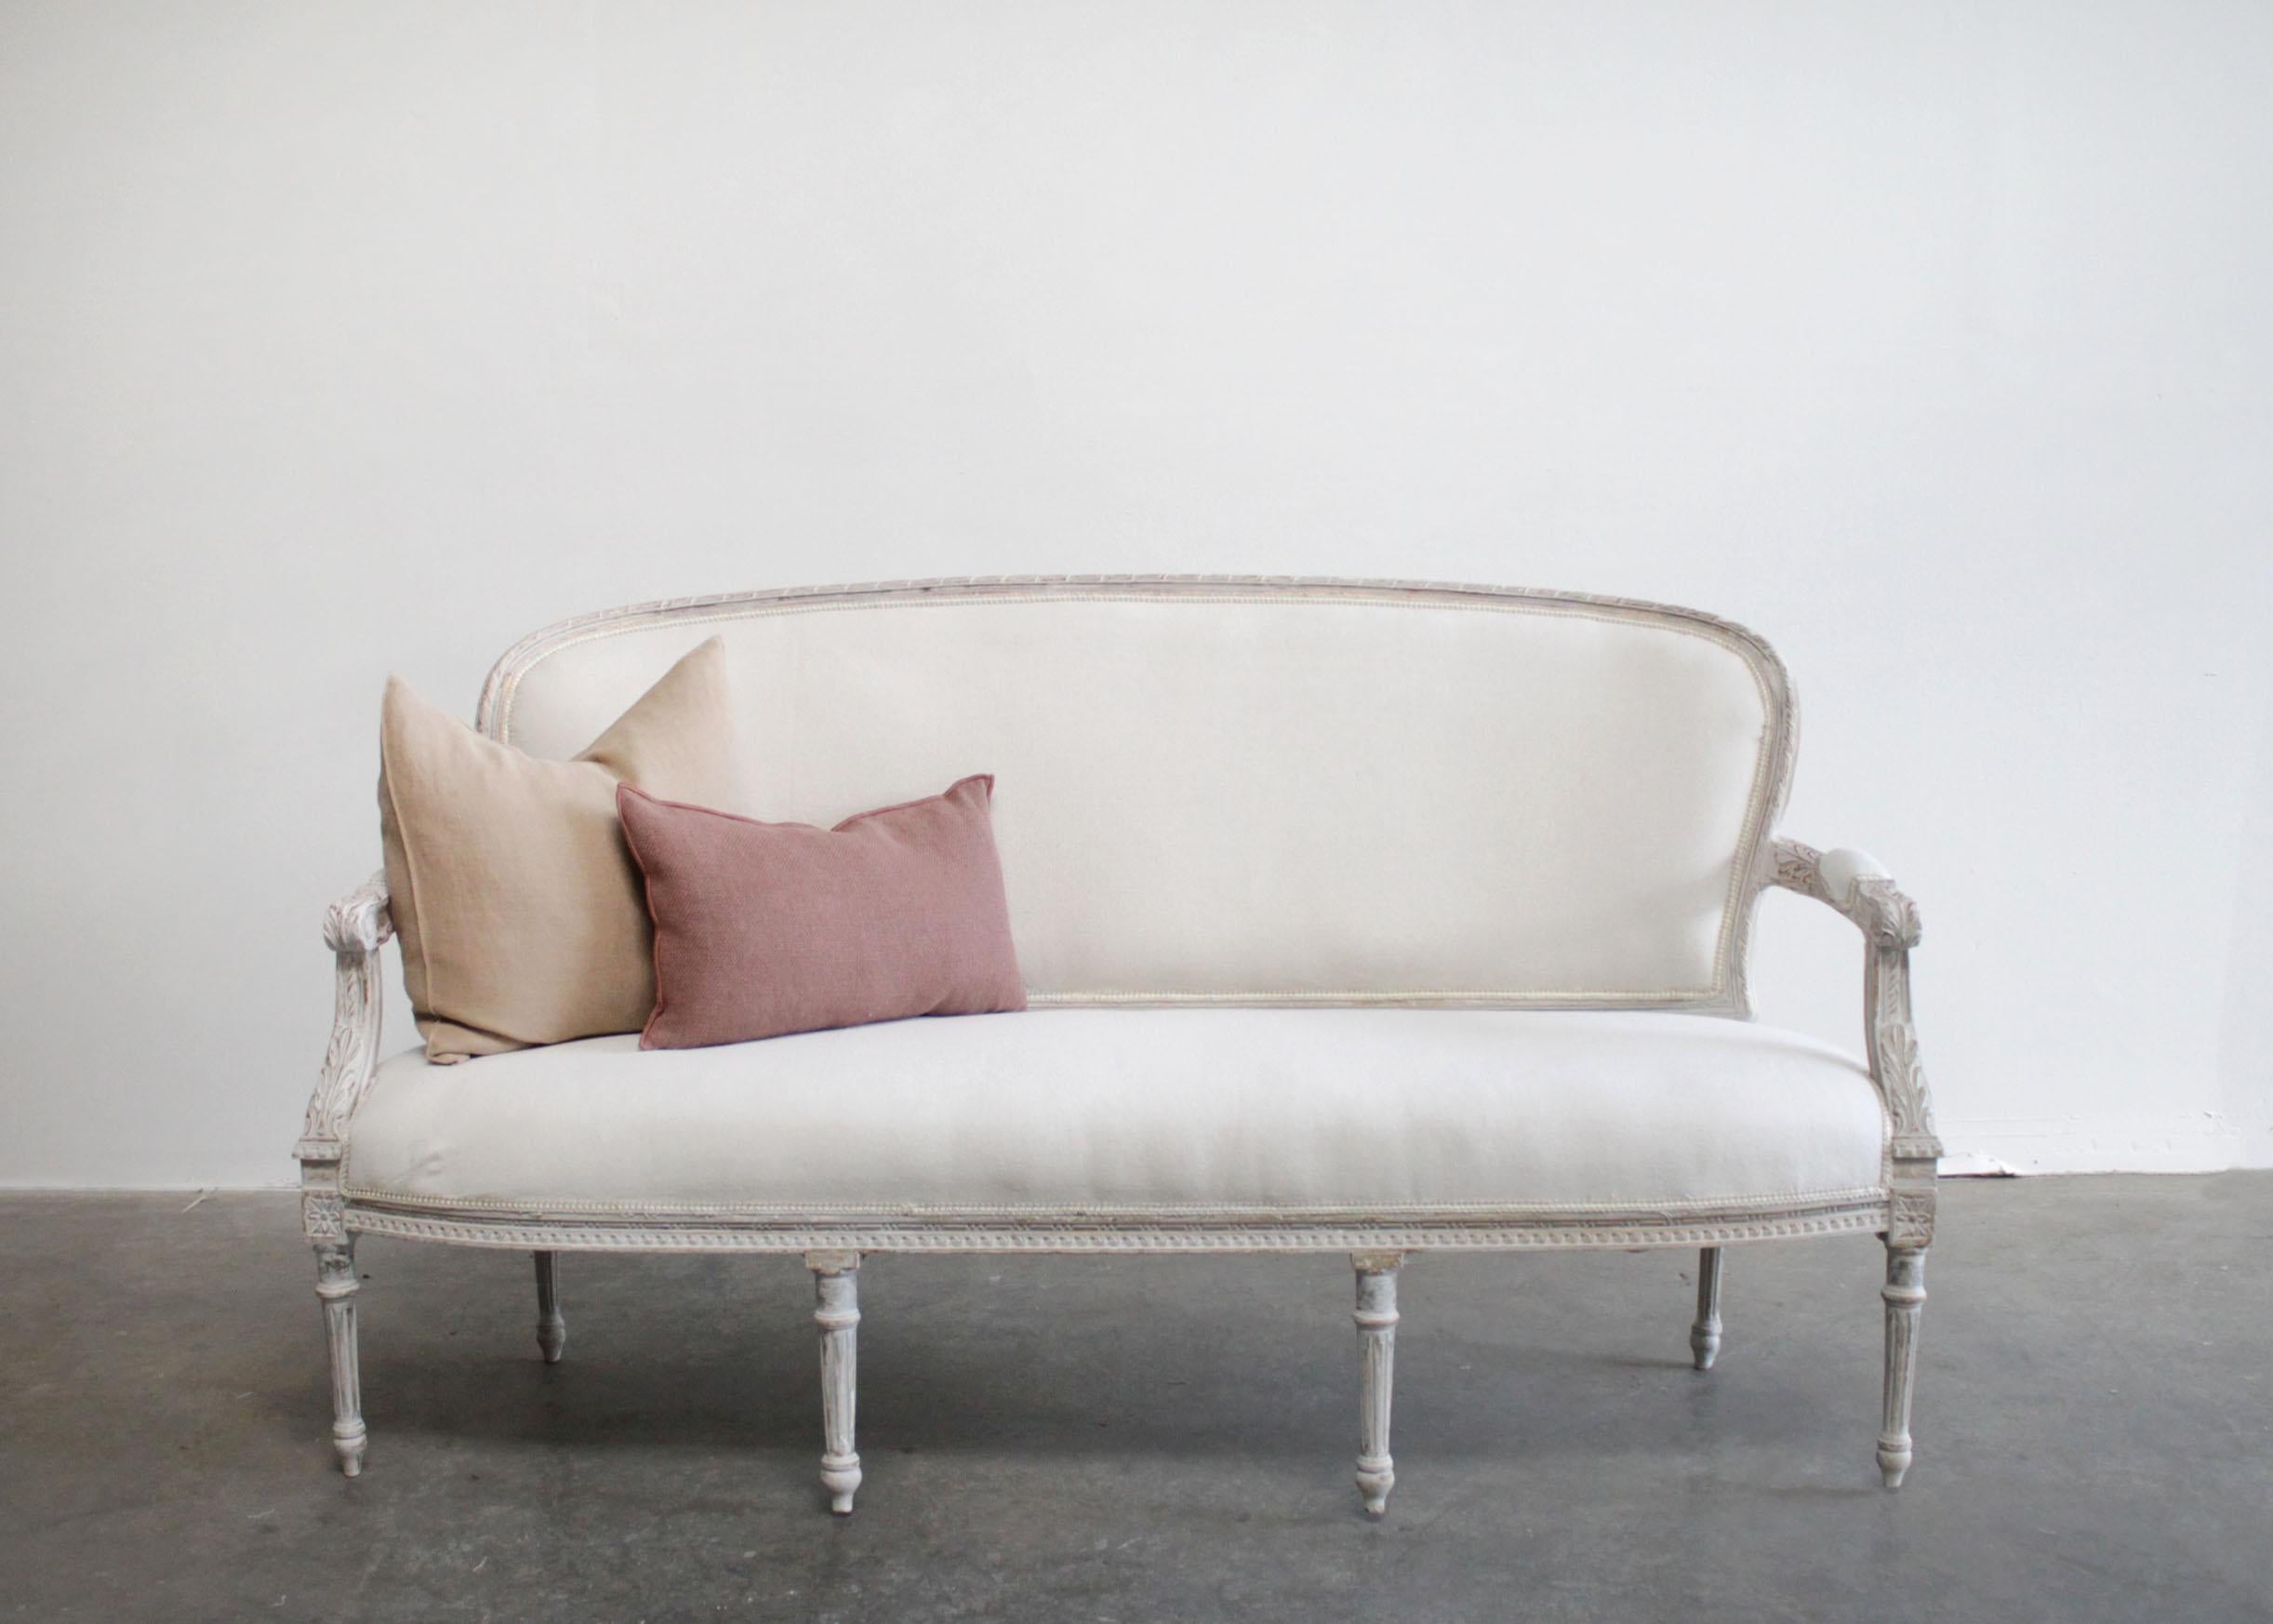 Vintage painted and upholstered Louis XVI style open arm sofa settee
Painted in a French white with subtle distressed edges, and wood showing through.
Classic fluted legs, with a medallion carving, and a curl ribbon carving.
Upholstered in a